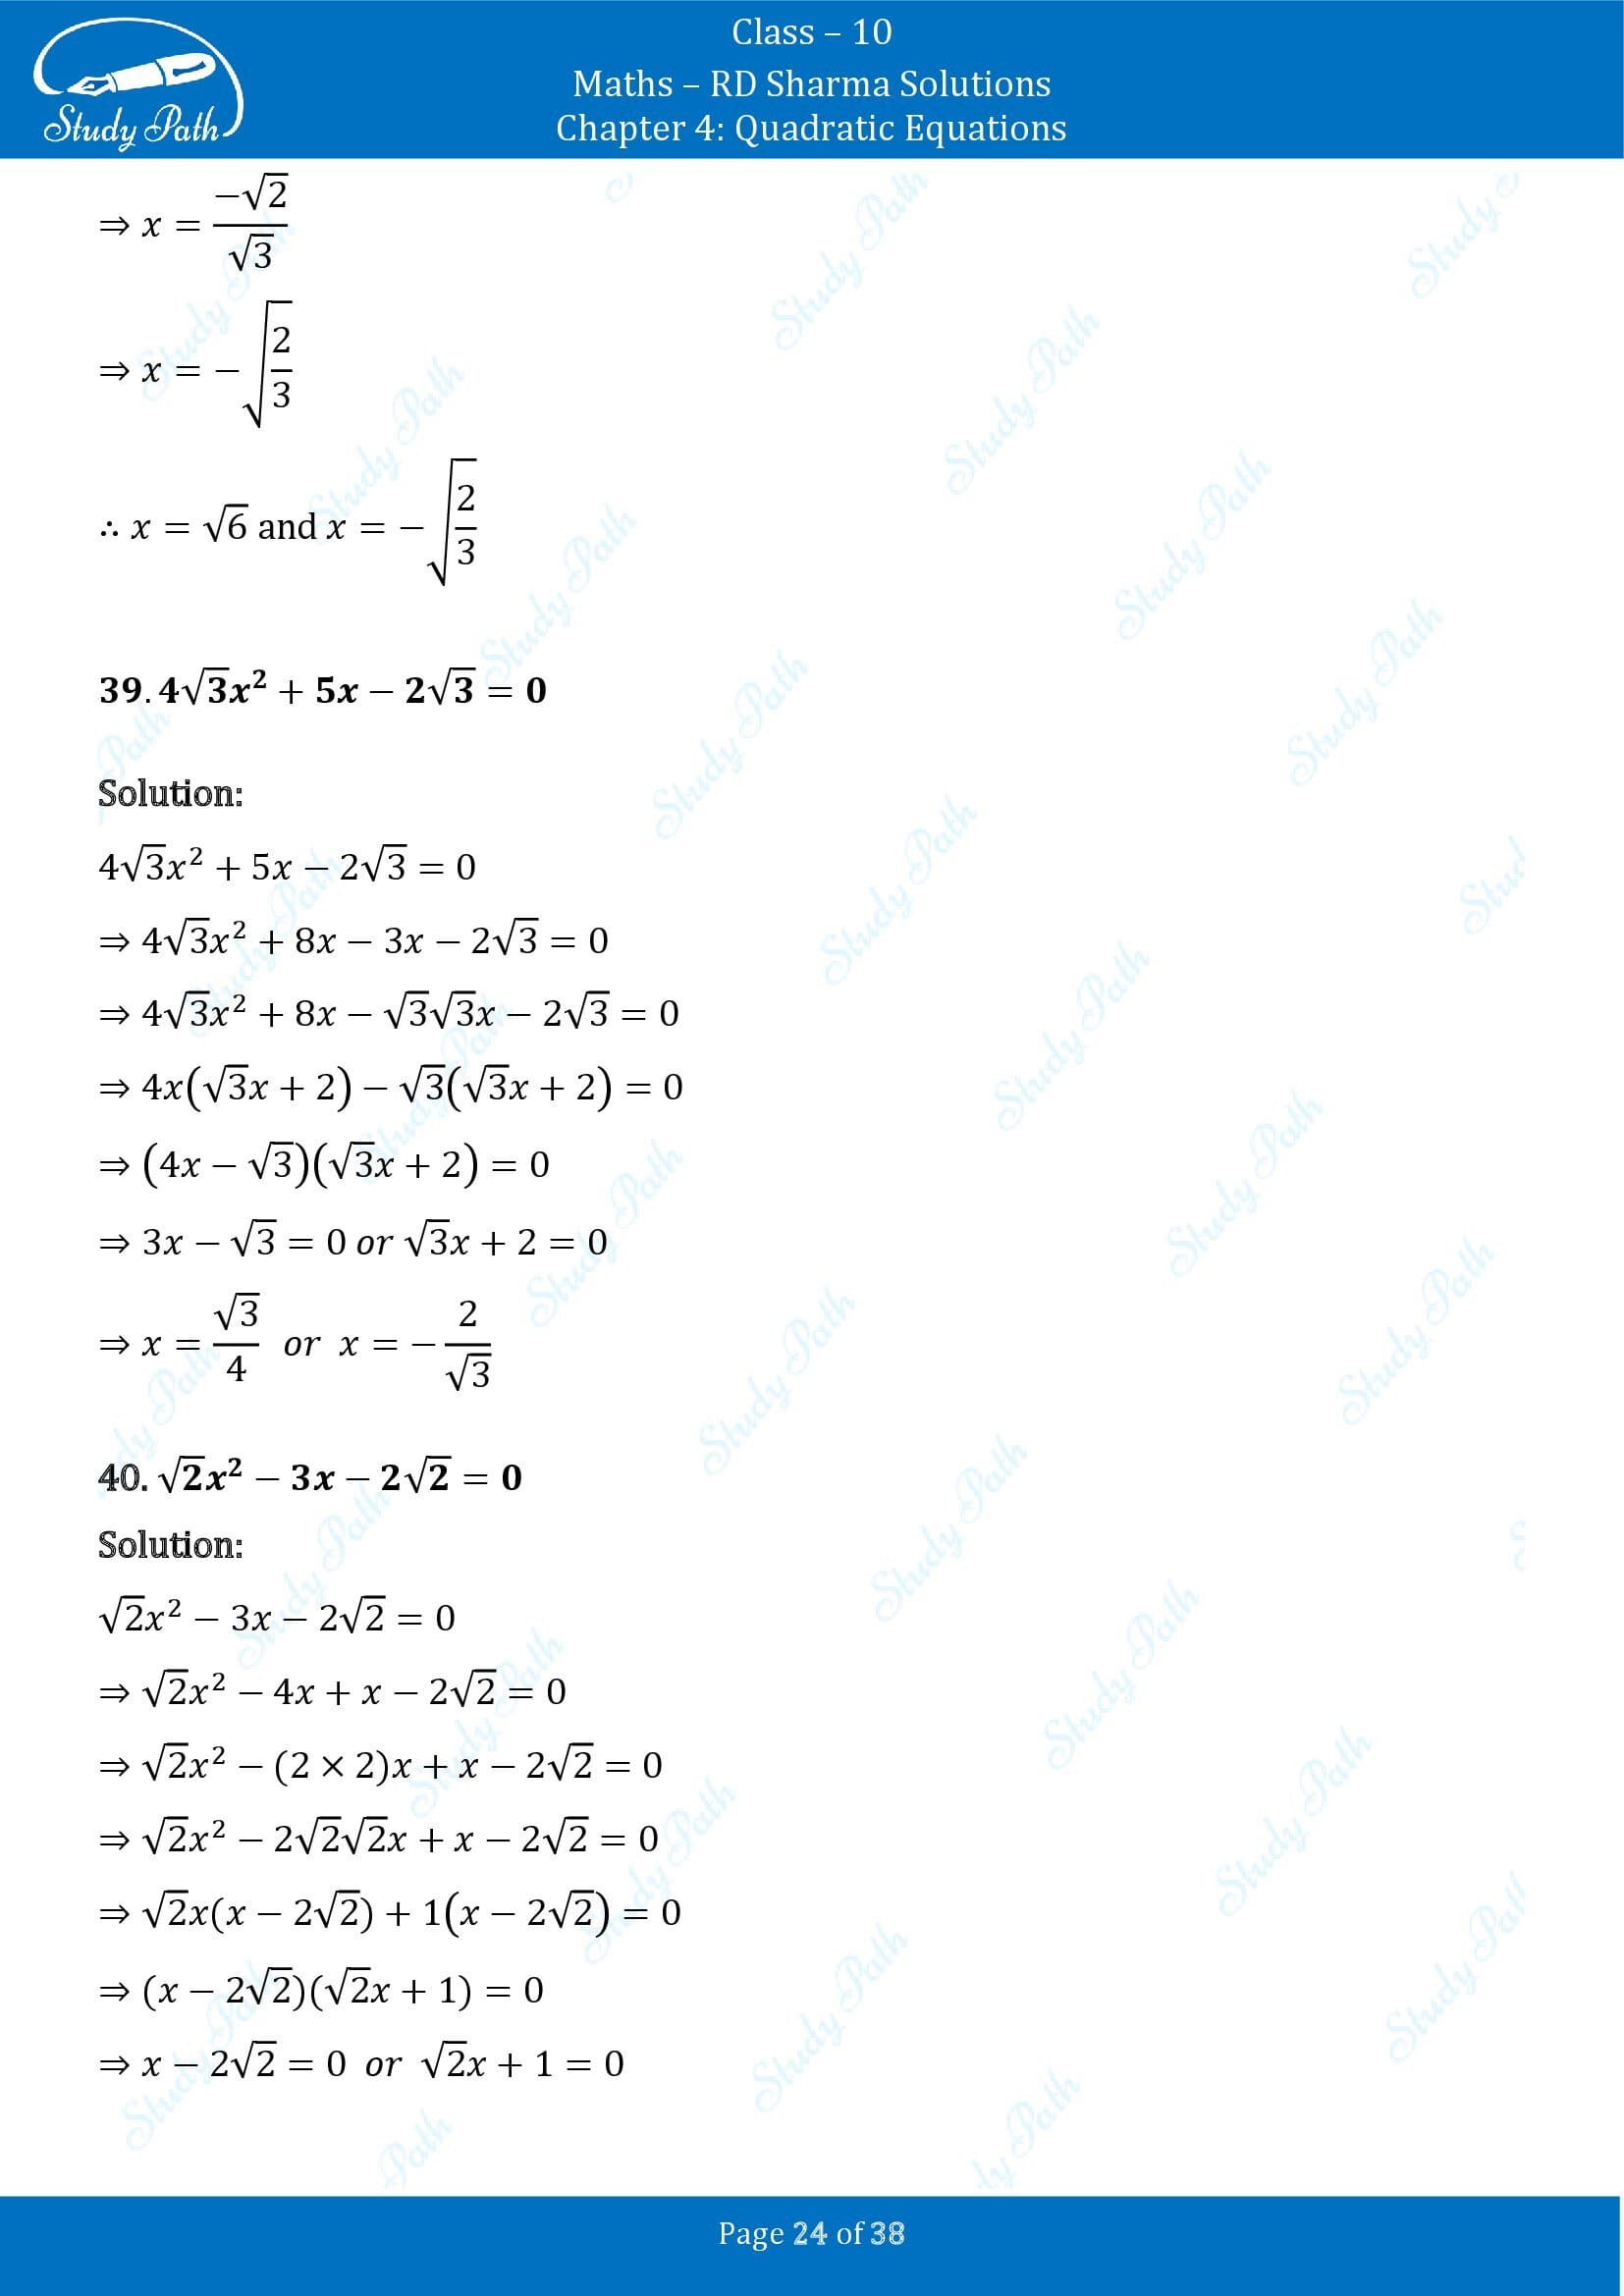 RD Sharma Solutions Class 10 Chapter 4 Quadratic Equations Exercise 4.3 00024